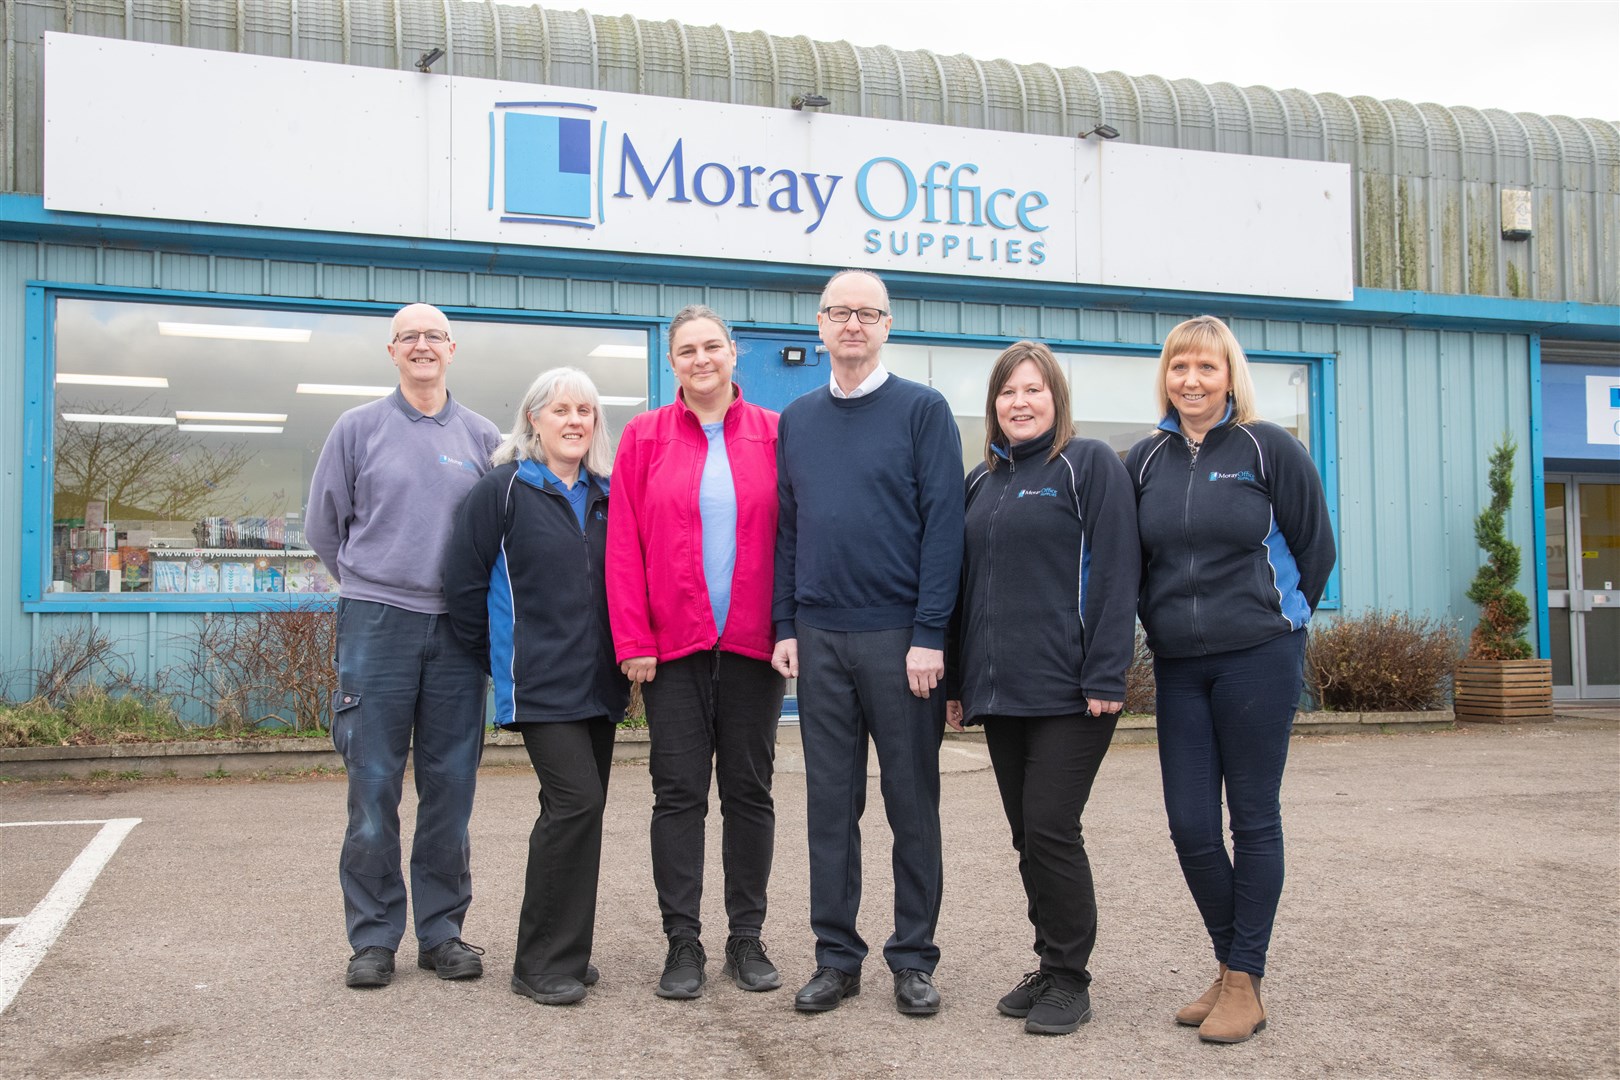 From left; Robert Bruce, Aileen Neil, Adriana Dobrin, Alan Elder, Cassie Russell and Mandy Faulkner. ..Moray Office Supplies for the Executive Magazine. ..Picture: Daniel Forsyth..